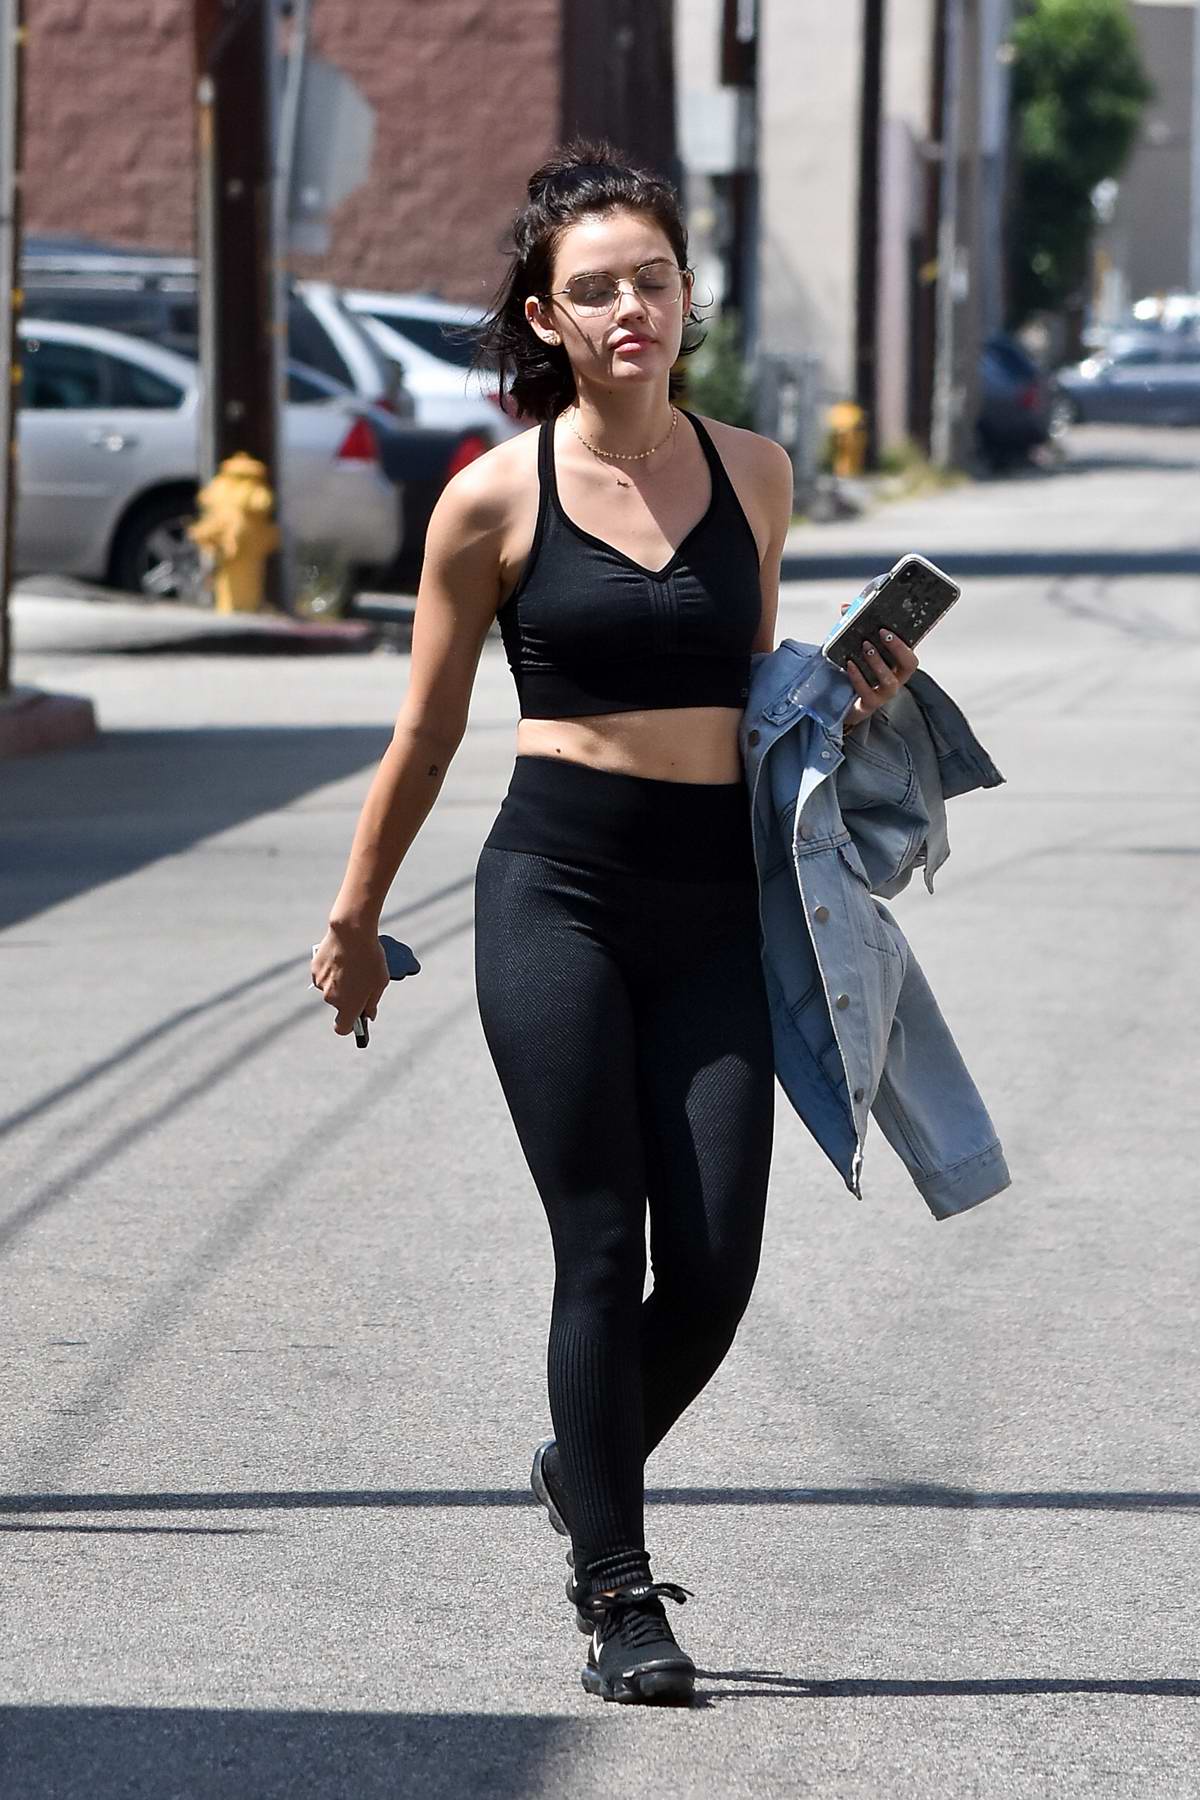 Lucy Hale heads out in a black sports bra and leggings after a